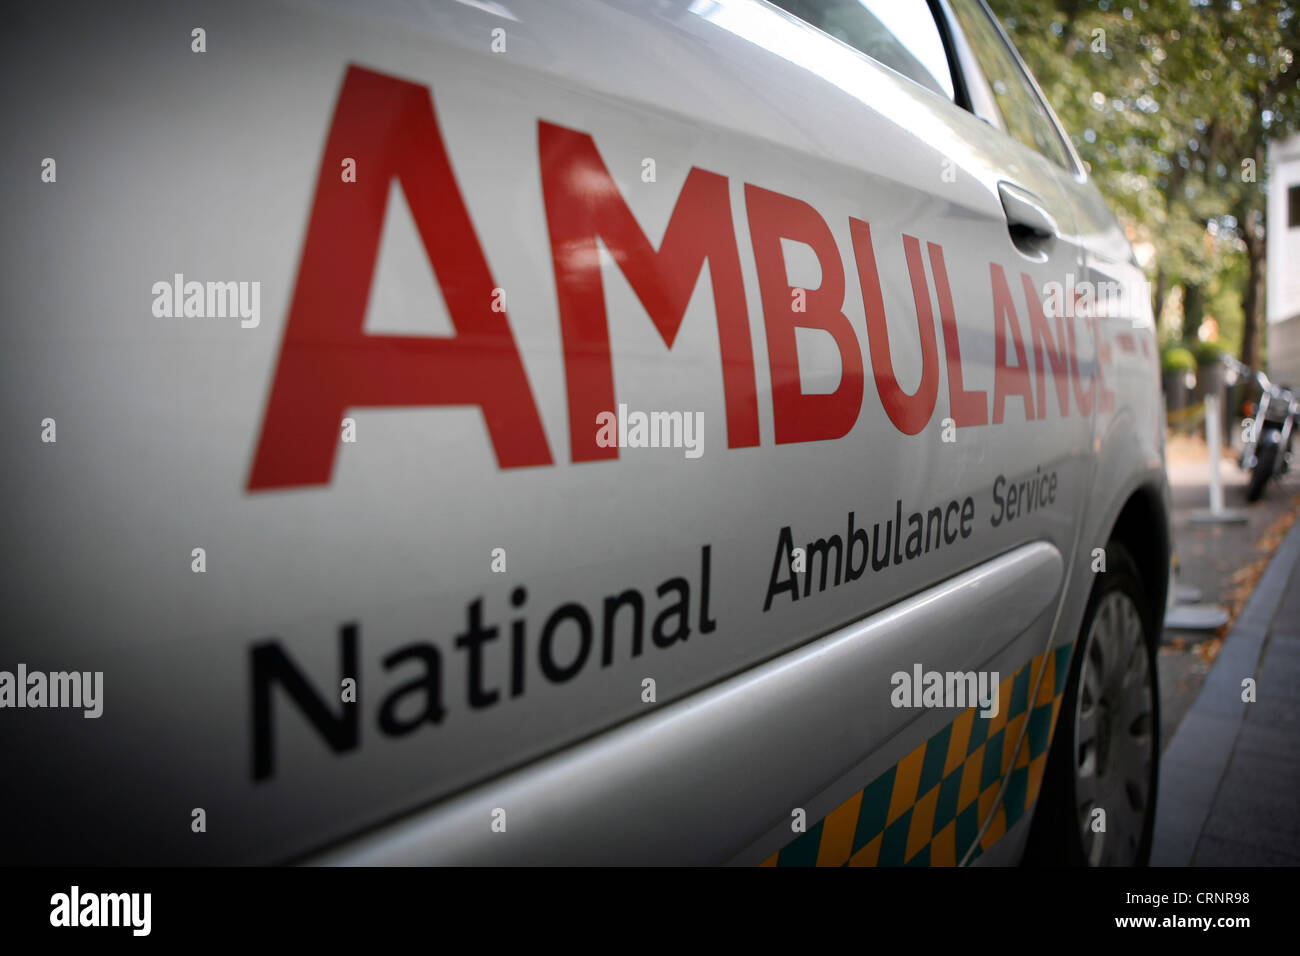 Close up image of the side of a private hospital ambulance. Stock Photo